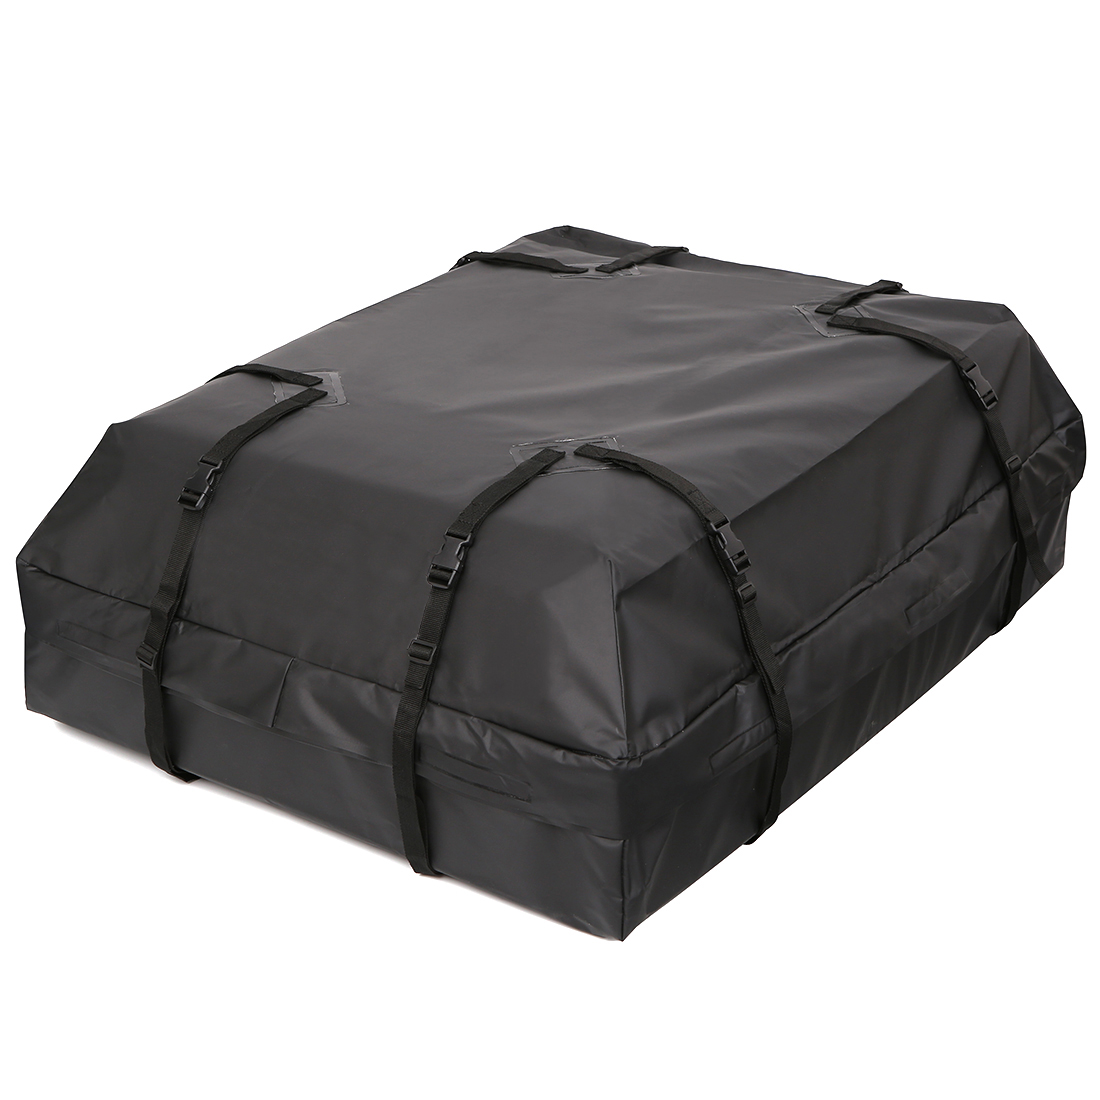 102002 Car Roof Cargo Carrier Bag Rooftop Storage Bag Featured Image